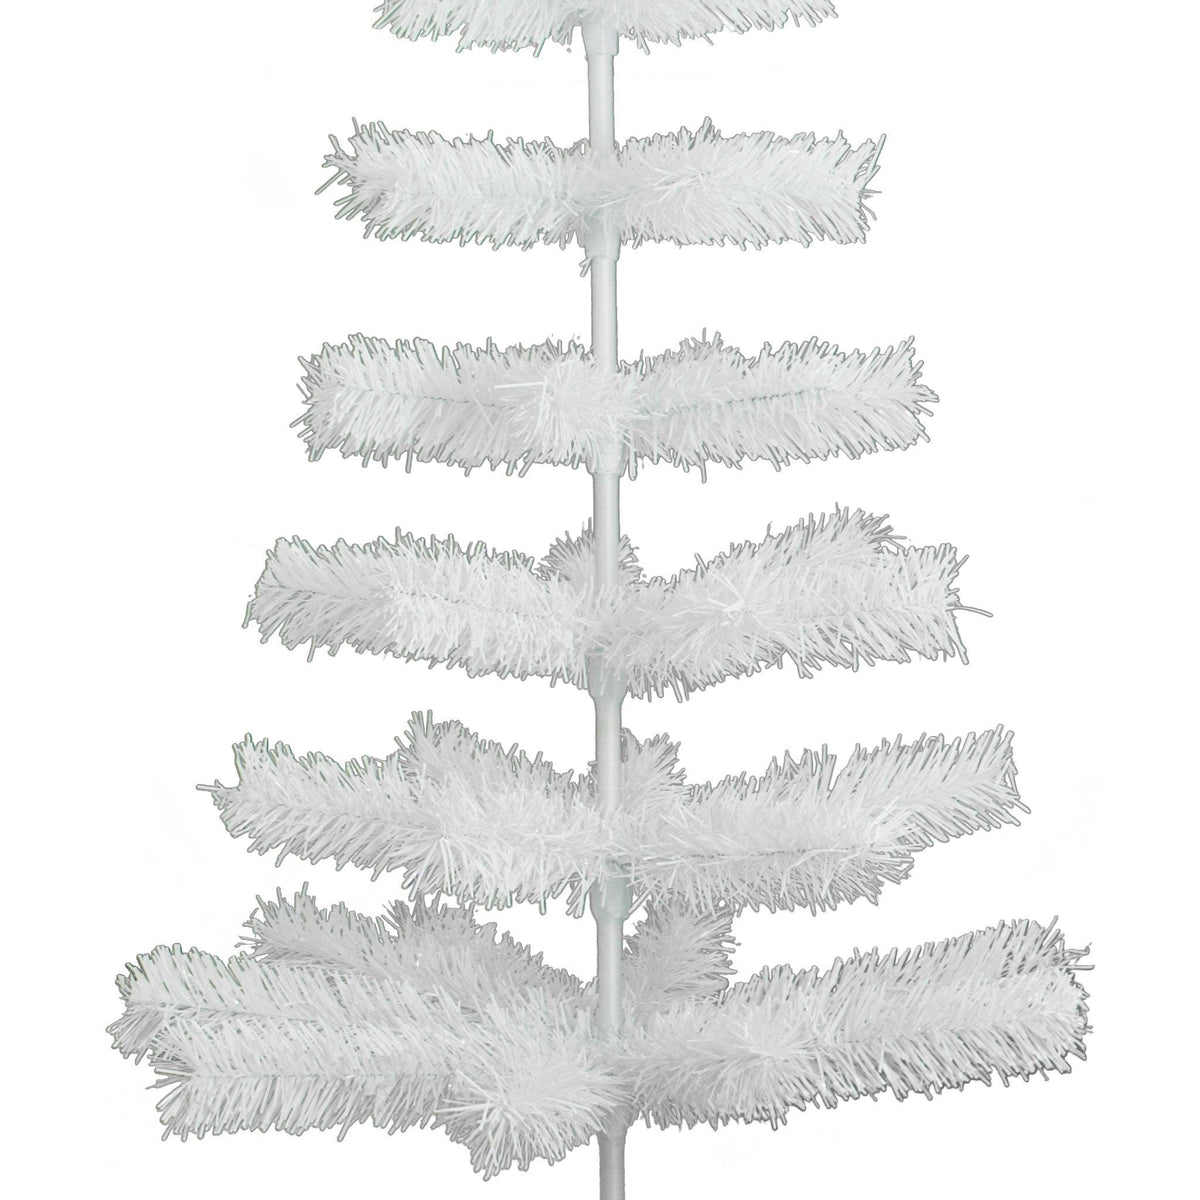 Middle Section of the 4ft white christmas tree.  Lee Display's 4ft White Tinsel Christmas Tree on sale now at leedisplay.com